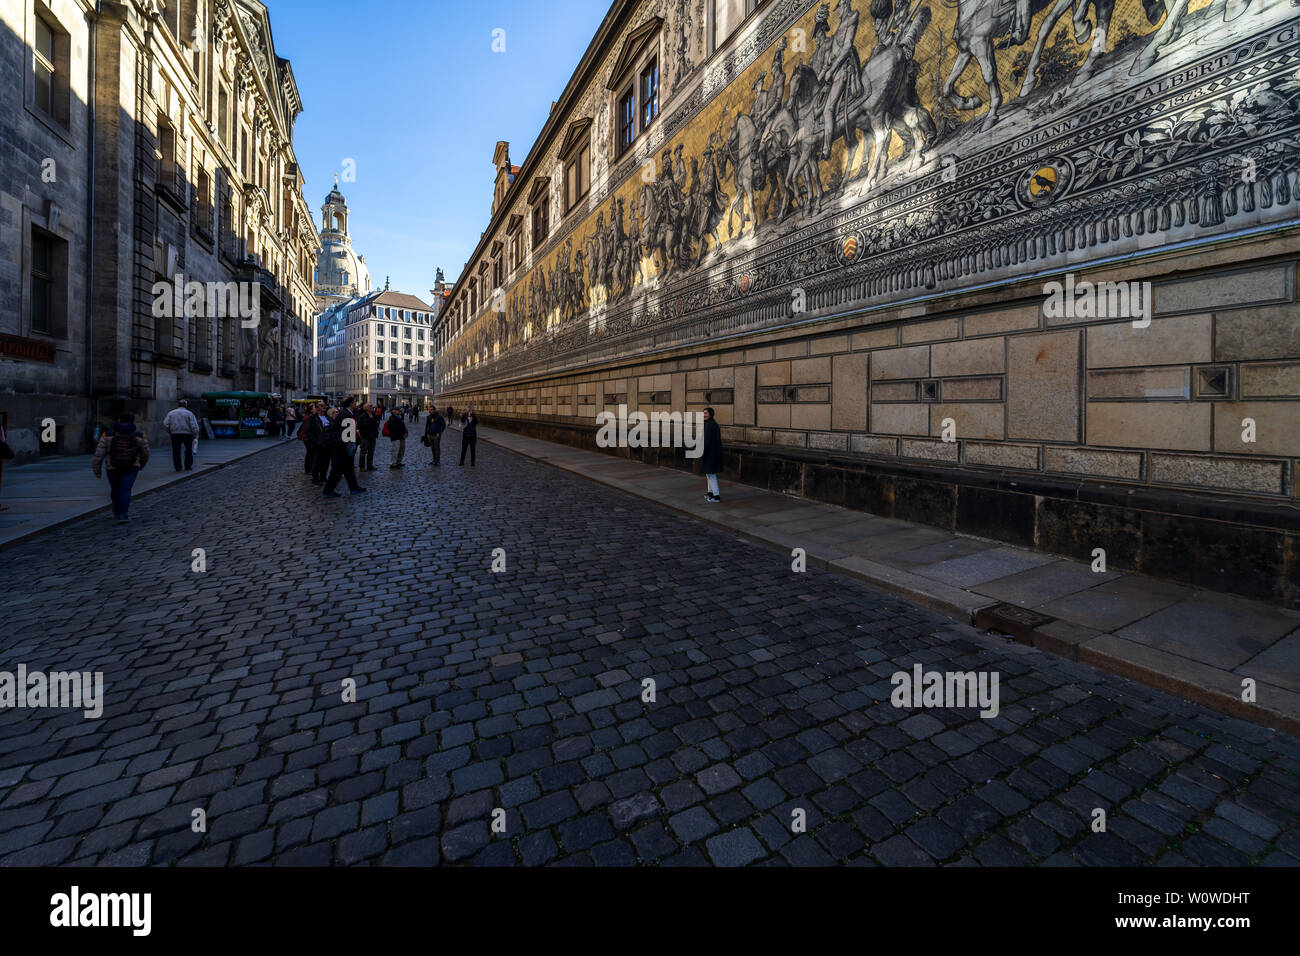 DRESDEN, GERMANY - OCTOBER 31, 2018: The Fuerstenzug (Procession of Princes) on Augustusstrasse. Fuerstenzug is the famous Meissen porcelain wall tile panel. Dresden is the capital city of the Free State of Saxony. Stock Photo